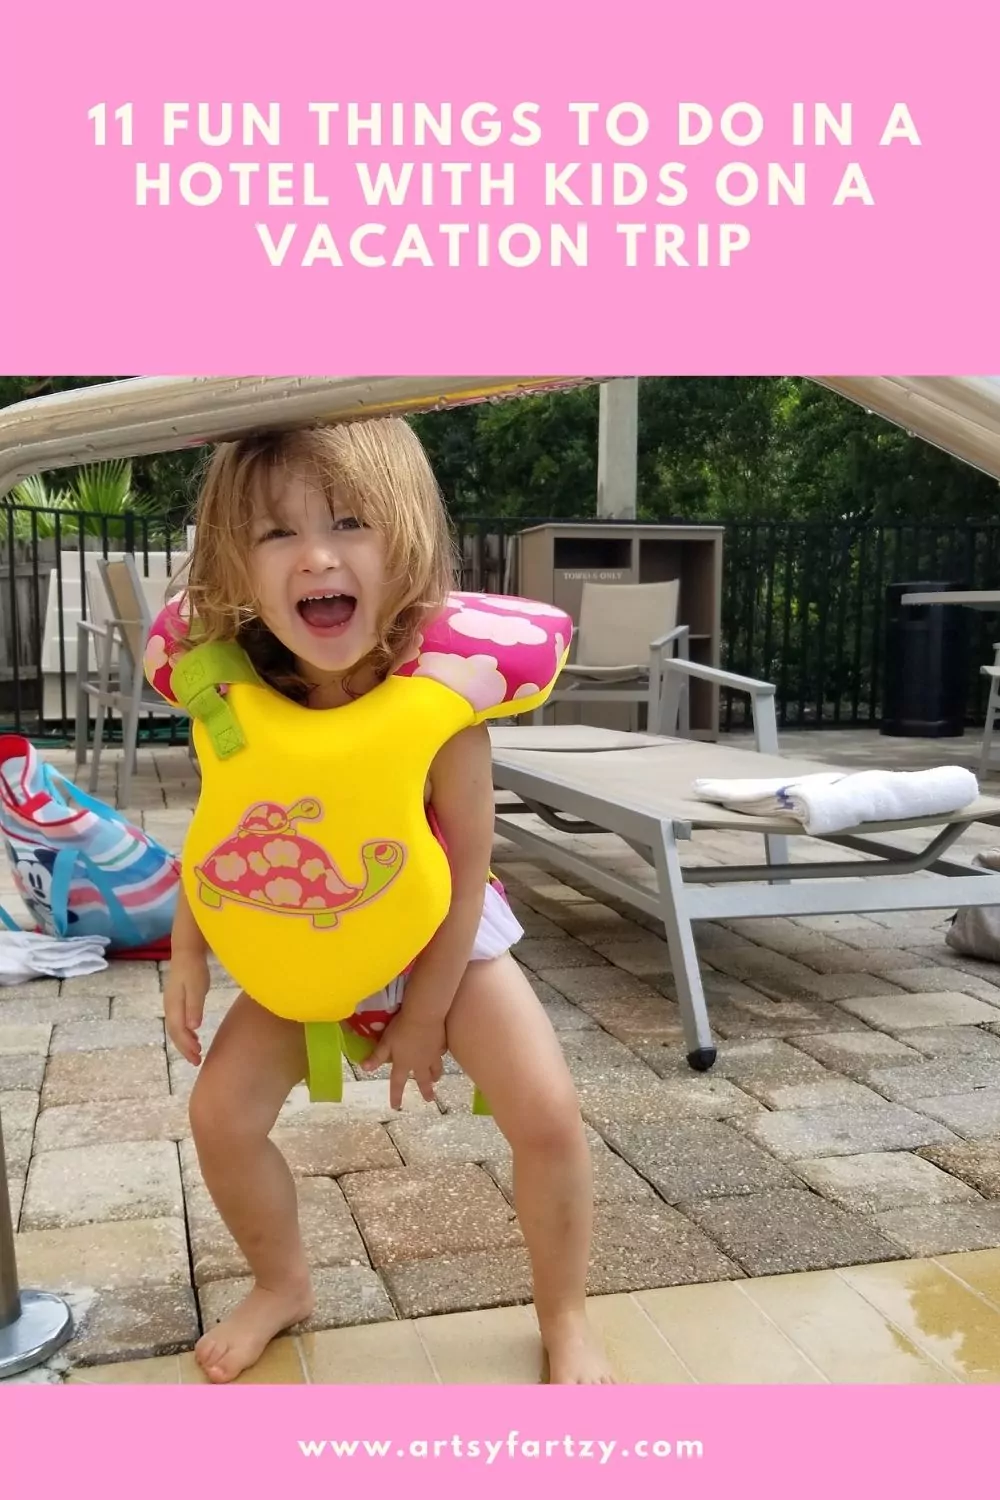 11 fun things to do in a hotel with kids on a vacation trip